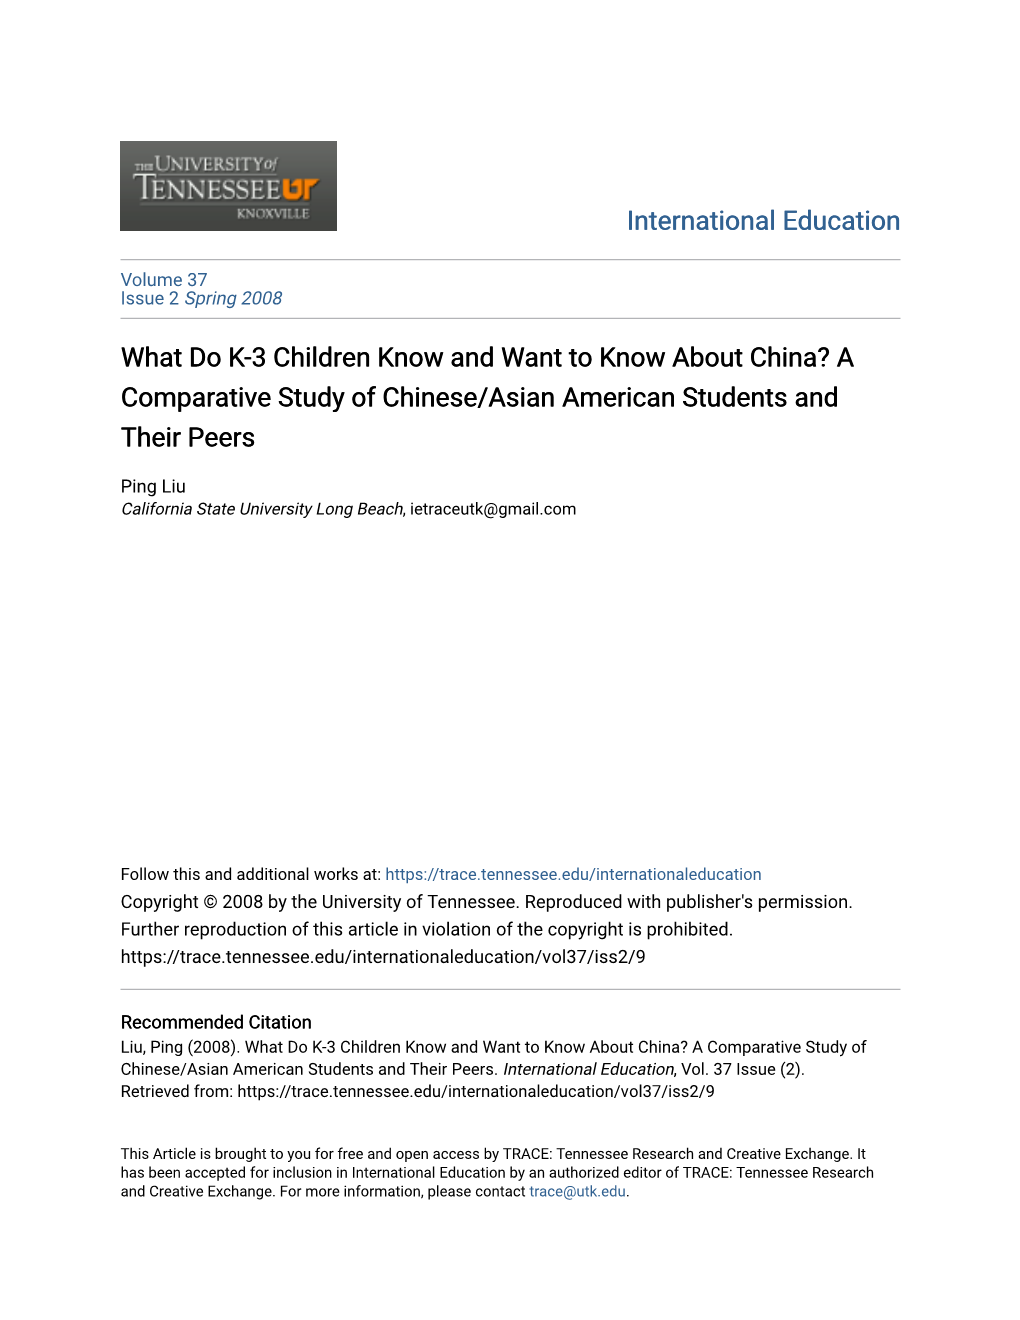 What Do K-3 Children Know and Want to Know About China? a Comparative Study of Chinese/Asian American Students and Their Peers